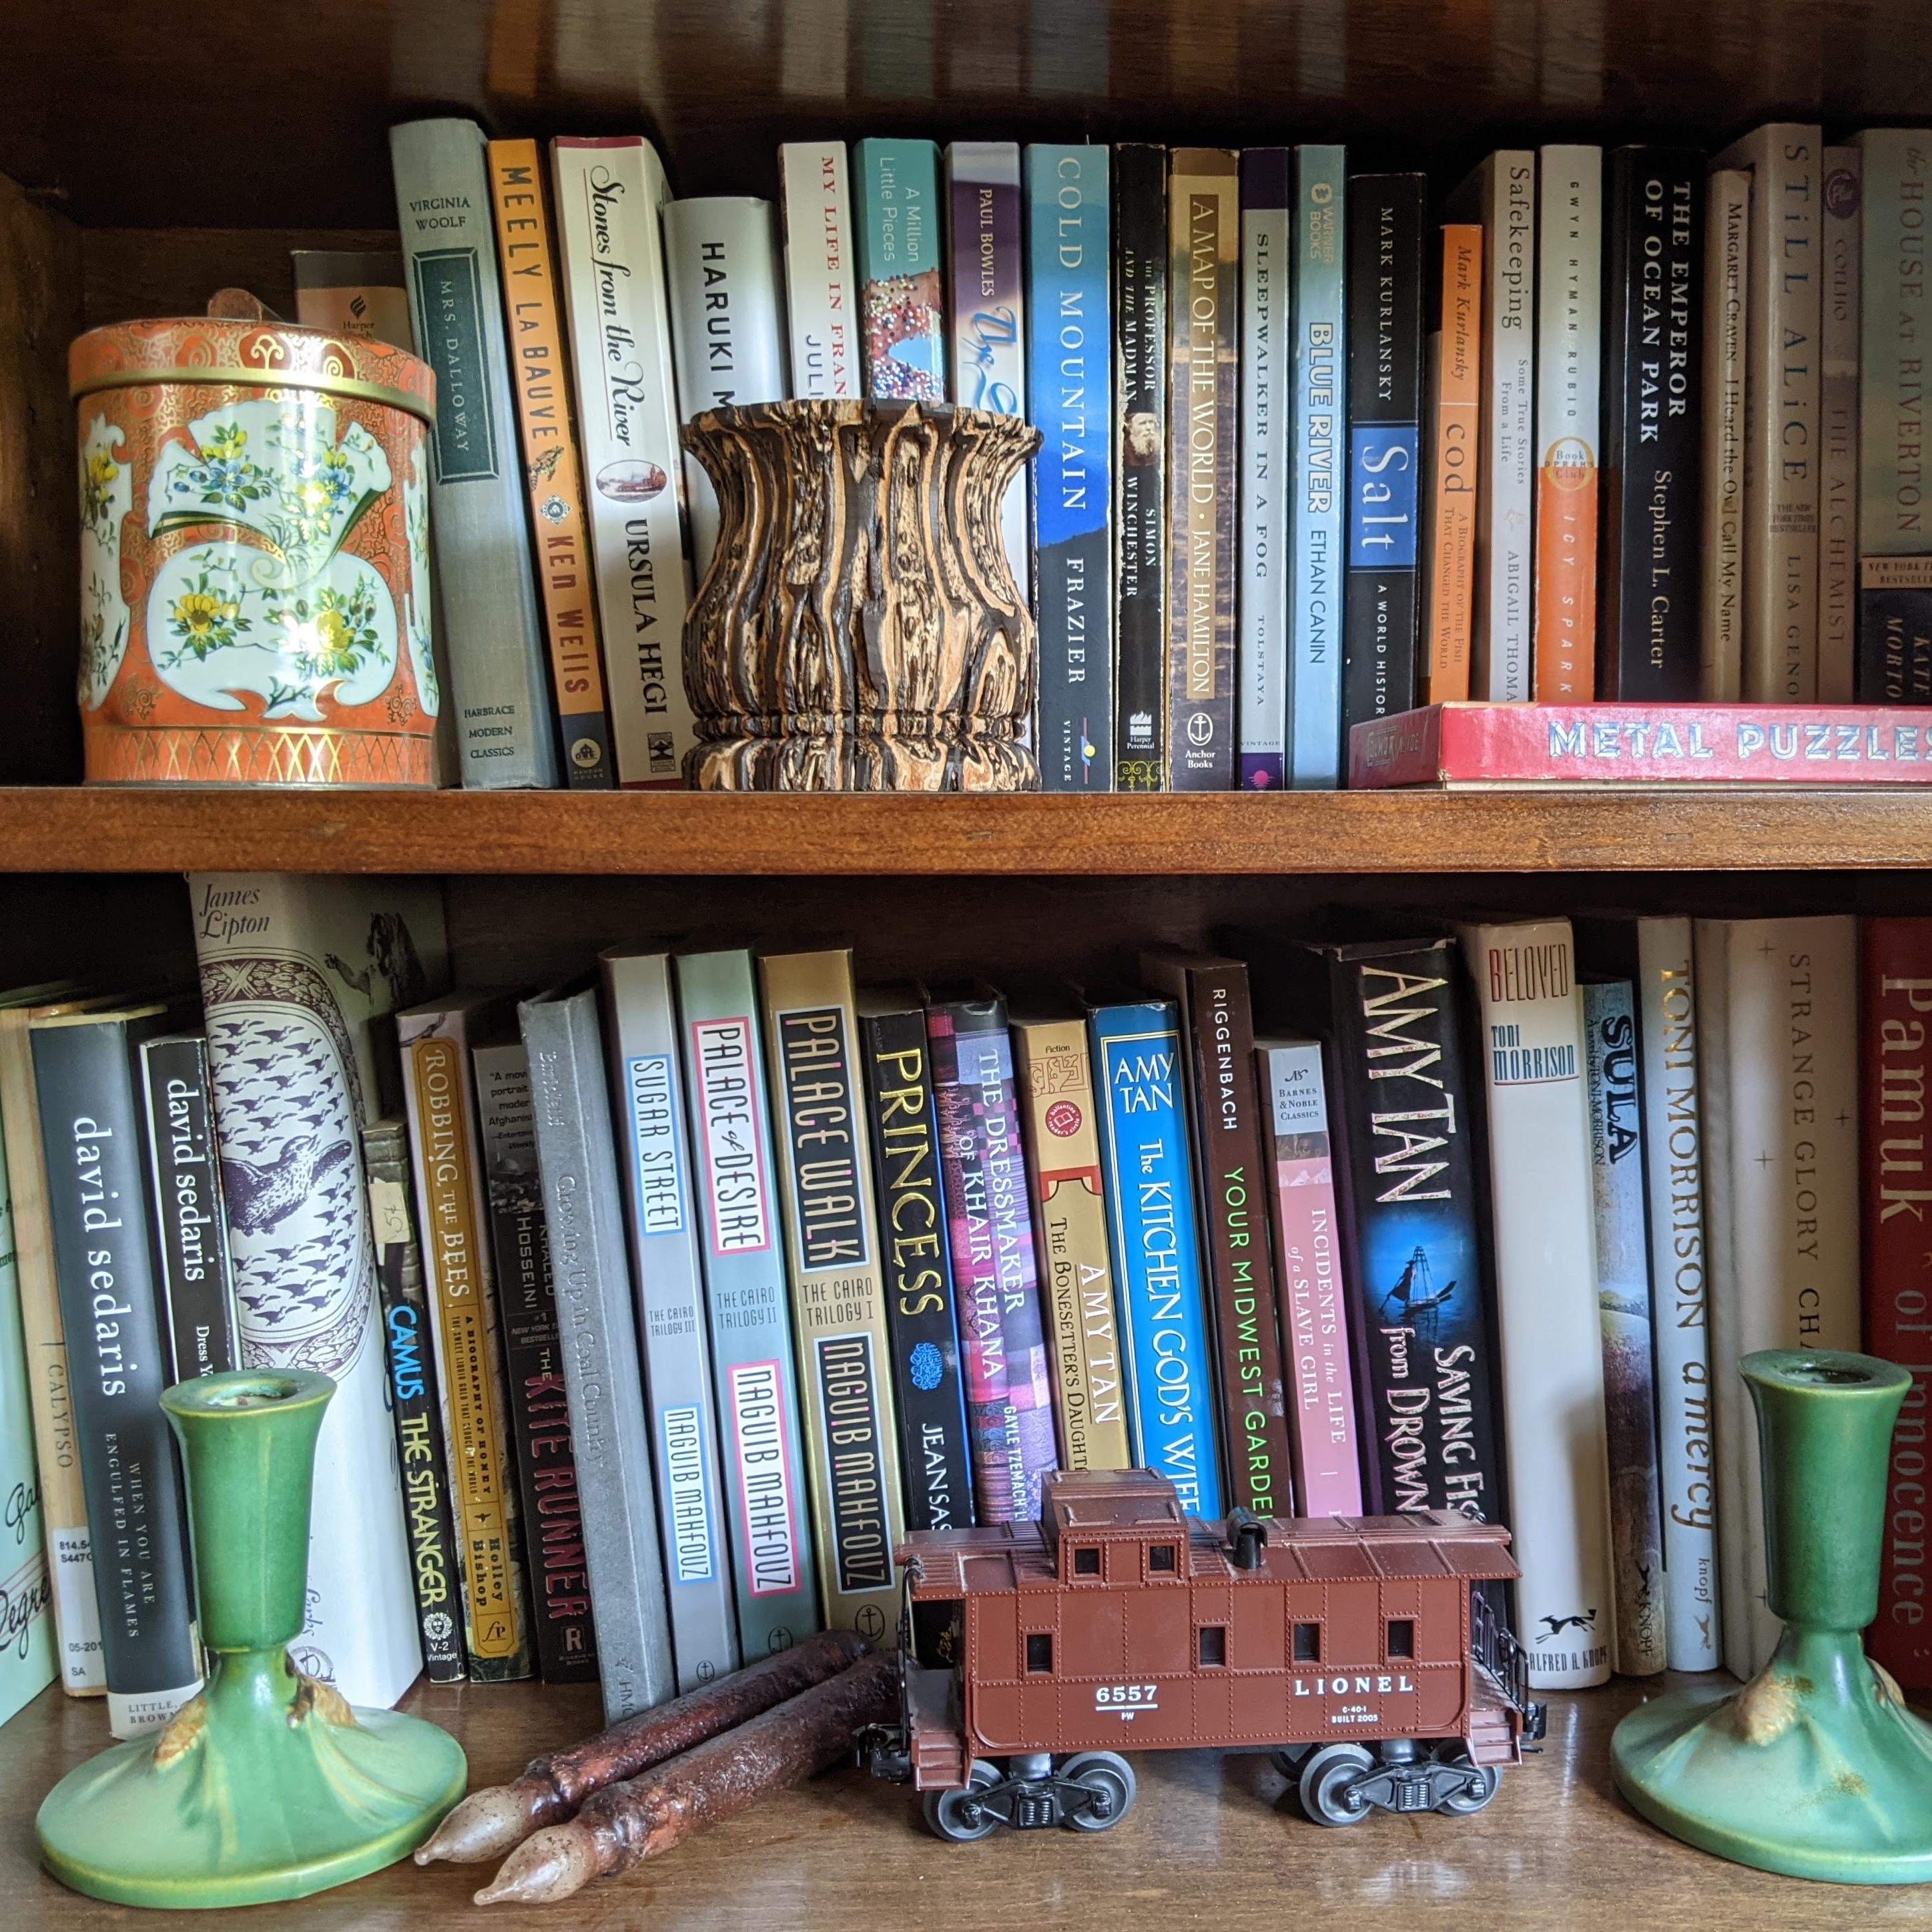 A photograph of books and decorative items on a wooden bookshelf.